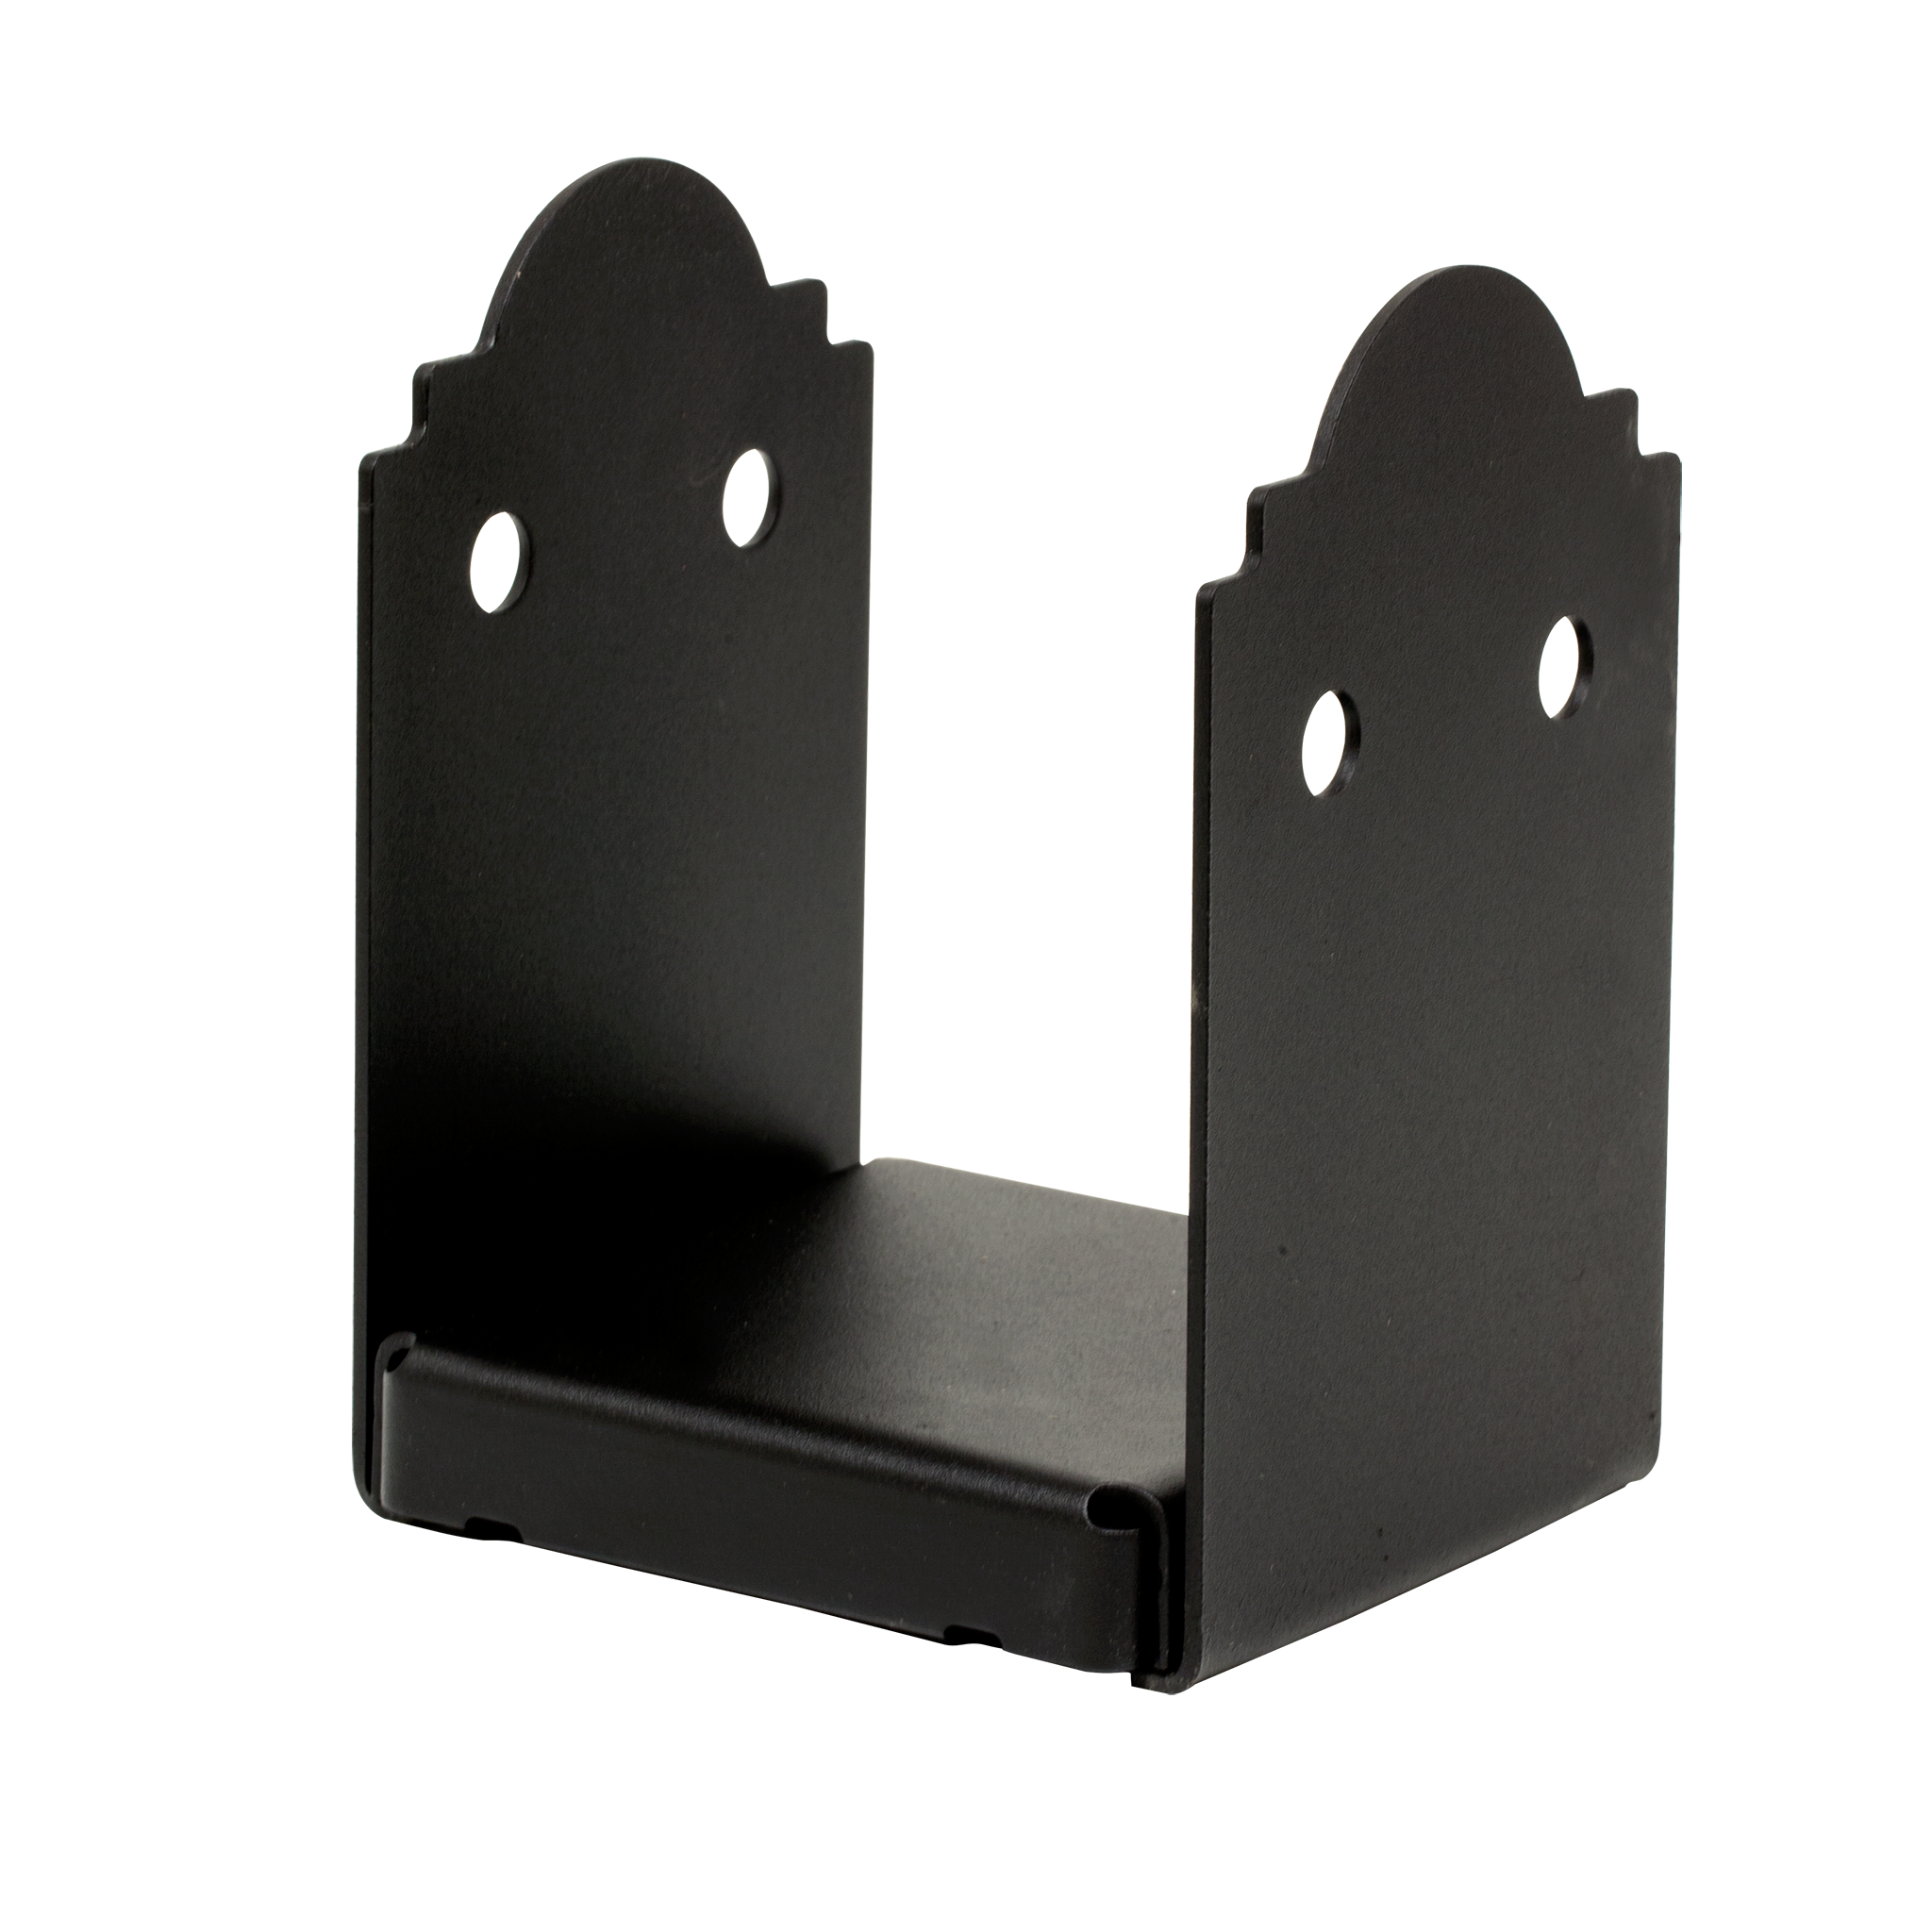 Outdoor Accents® Post Base for 6x6 Rough, ZMAX® Black Powder-Coated